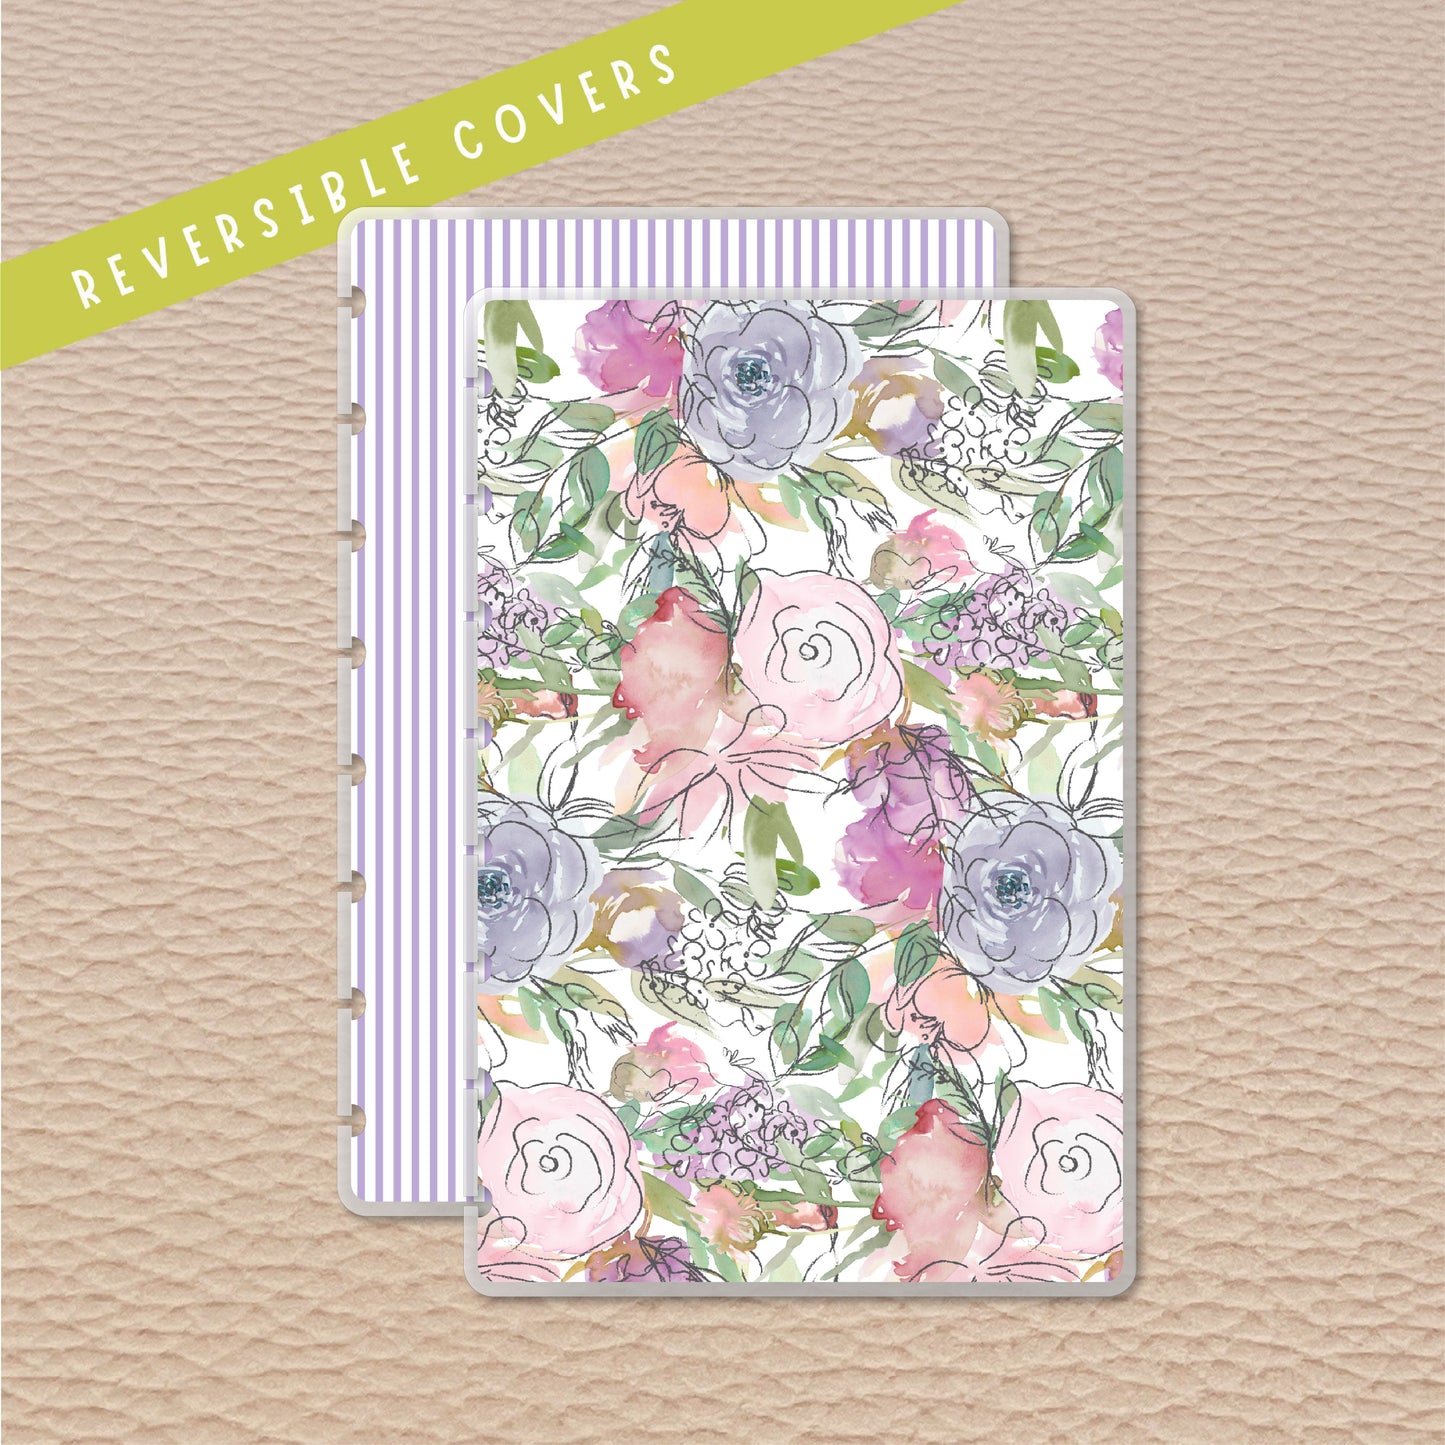 Spring Watercolor Floral Junior Discbound Notebook Covers